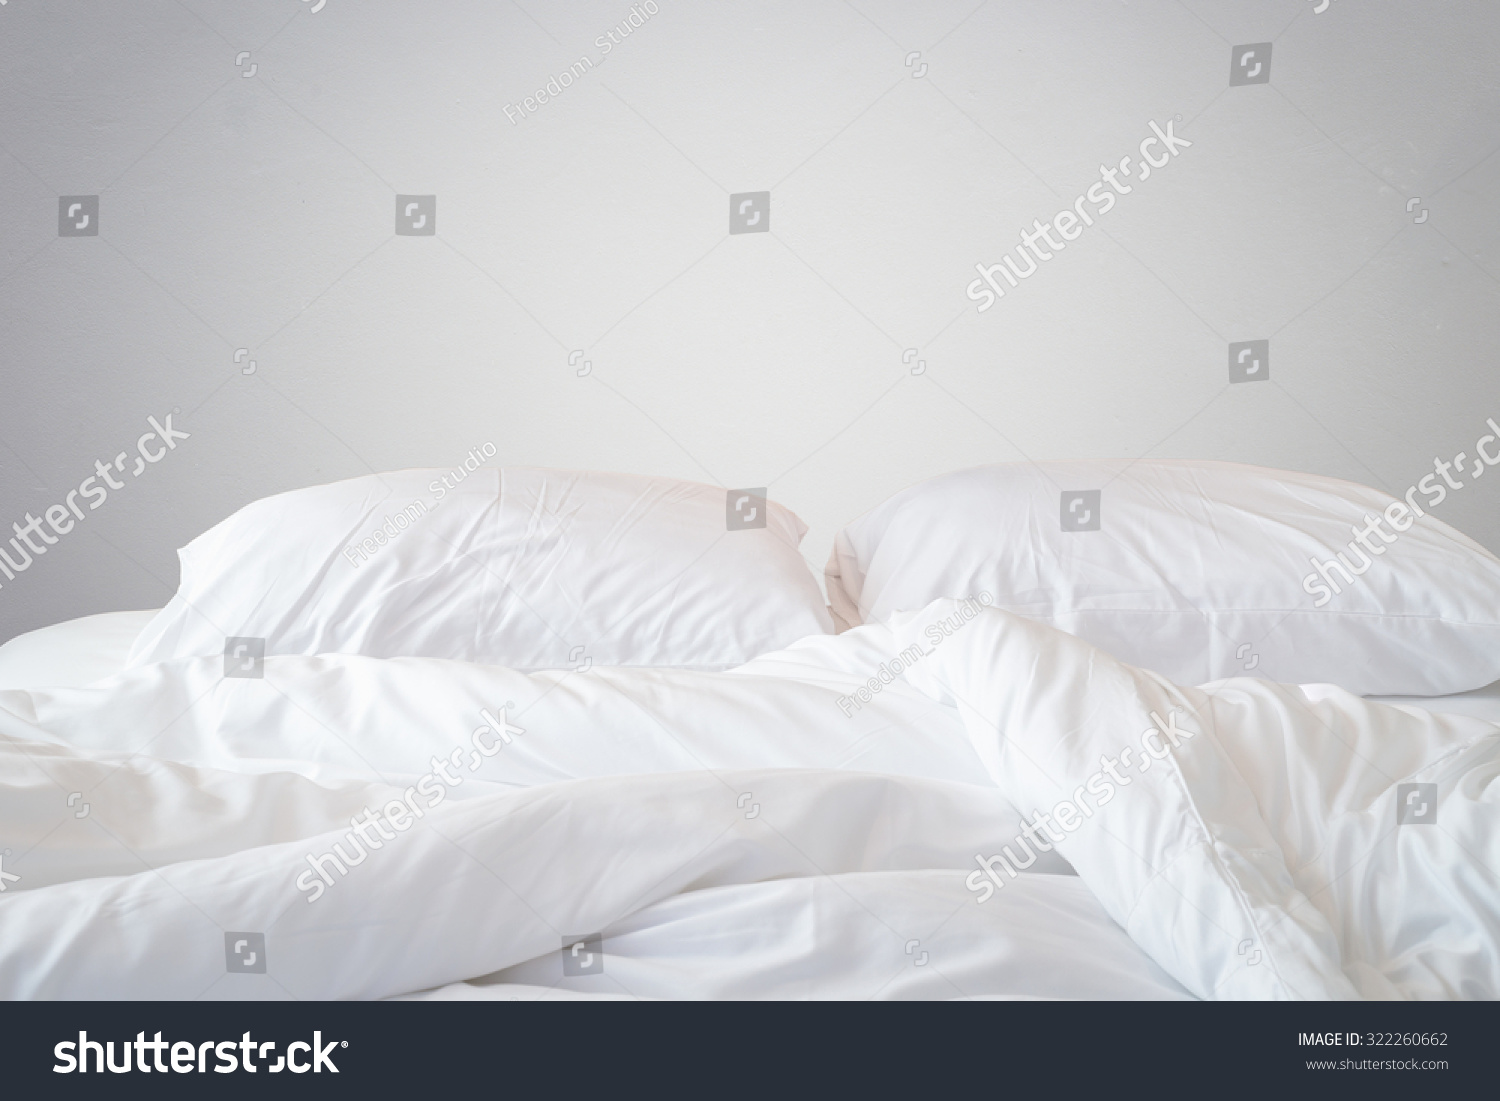 Close up white bedding sheets and pillow on natural stone wall room background, Messy bed concept #322260662